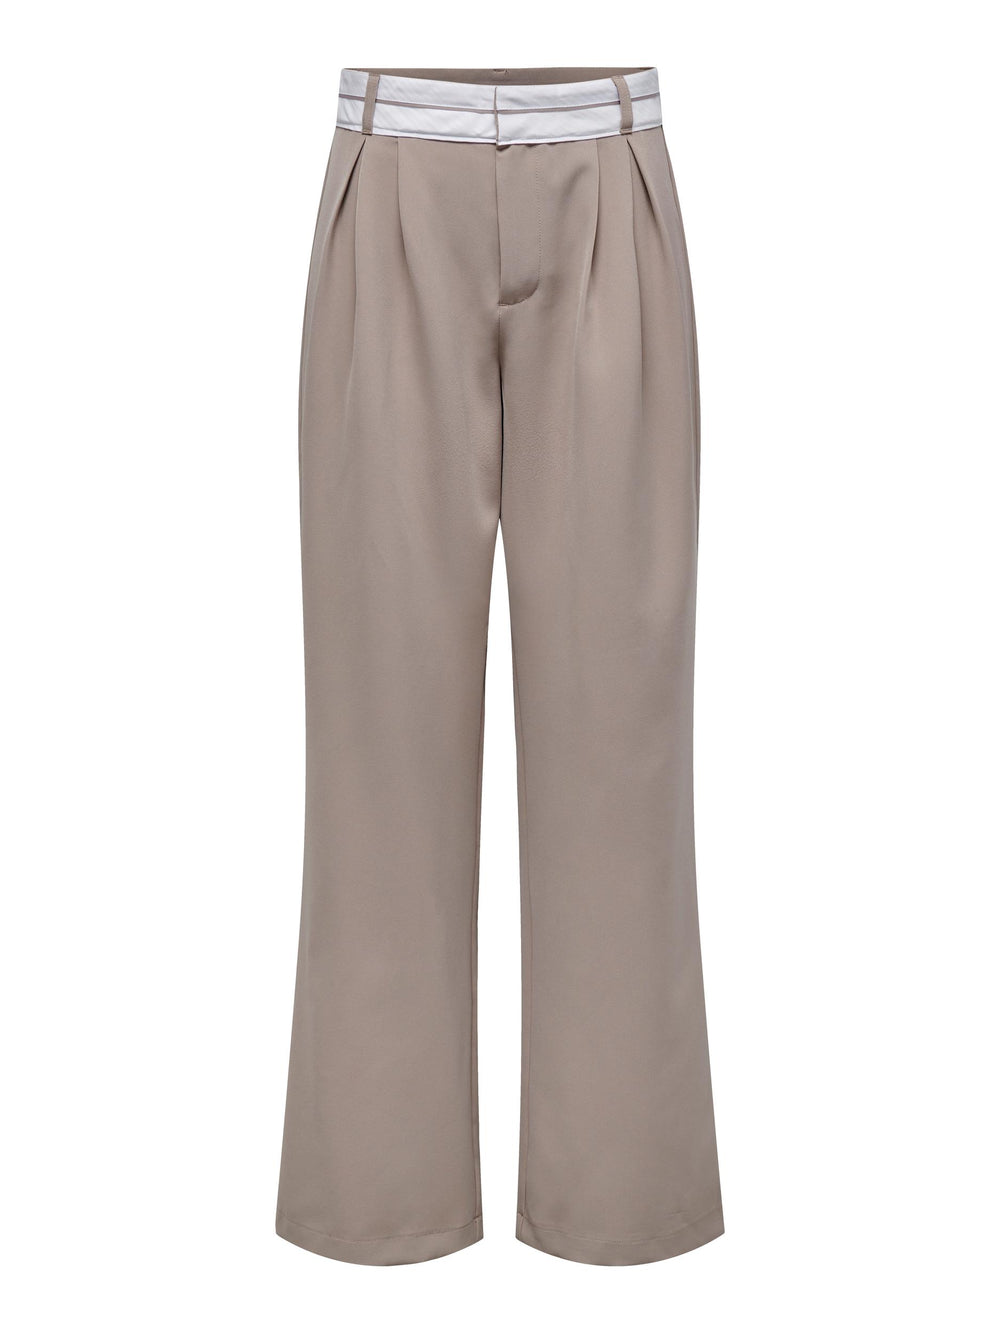 ONLY Malika Wide Leg Relaxed Dad Trousers with Rolled Waistband in Beige - One Nation Clothing